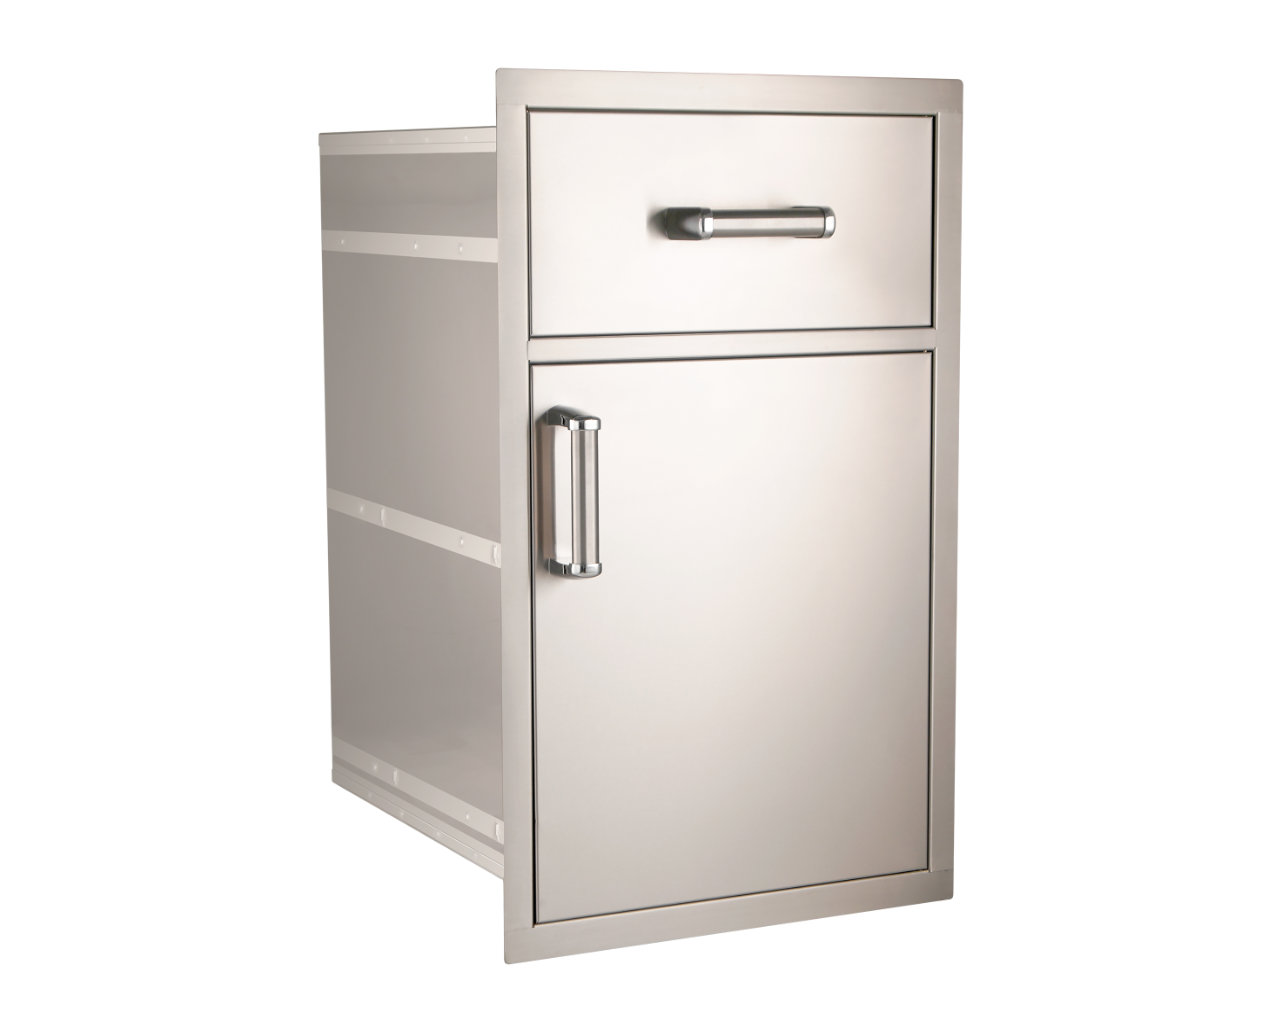 Fire Magic Grills Large Pantry Door/Drawer Combo, , hi-res image number null